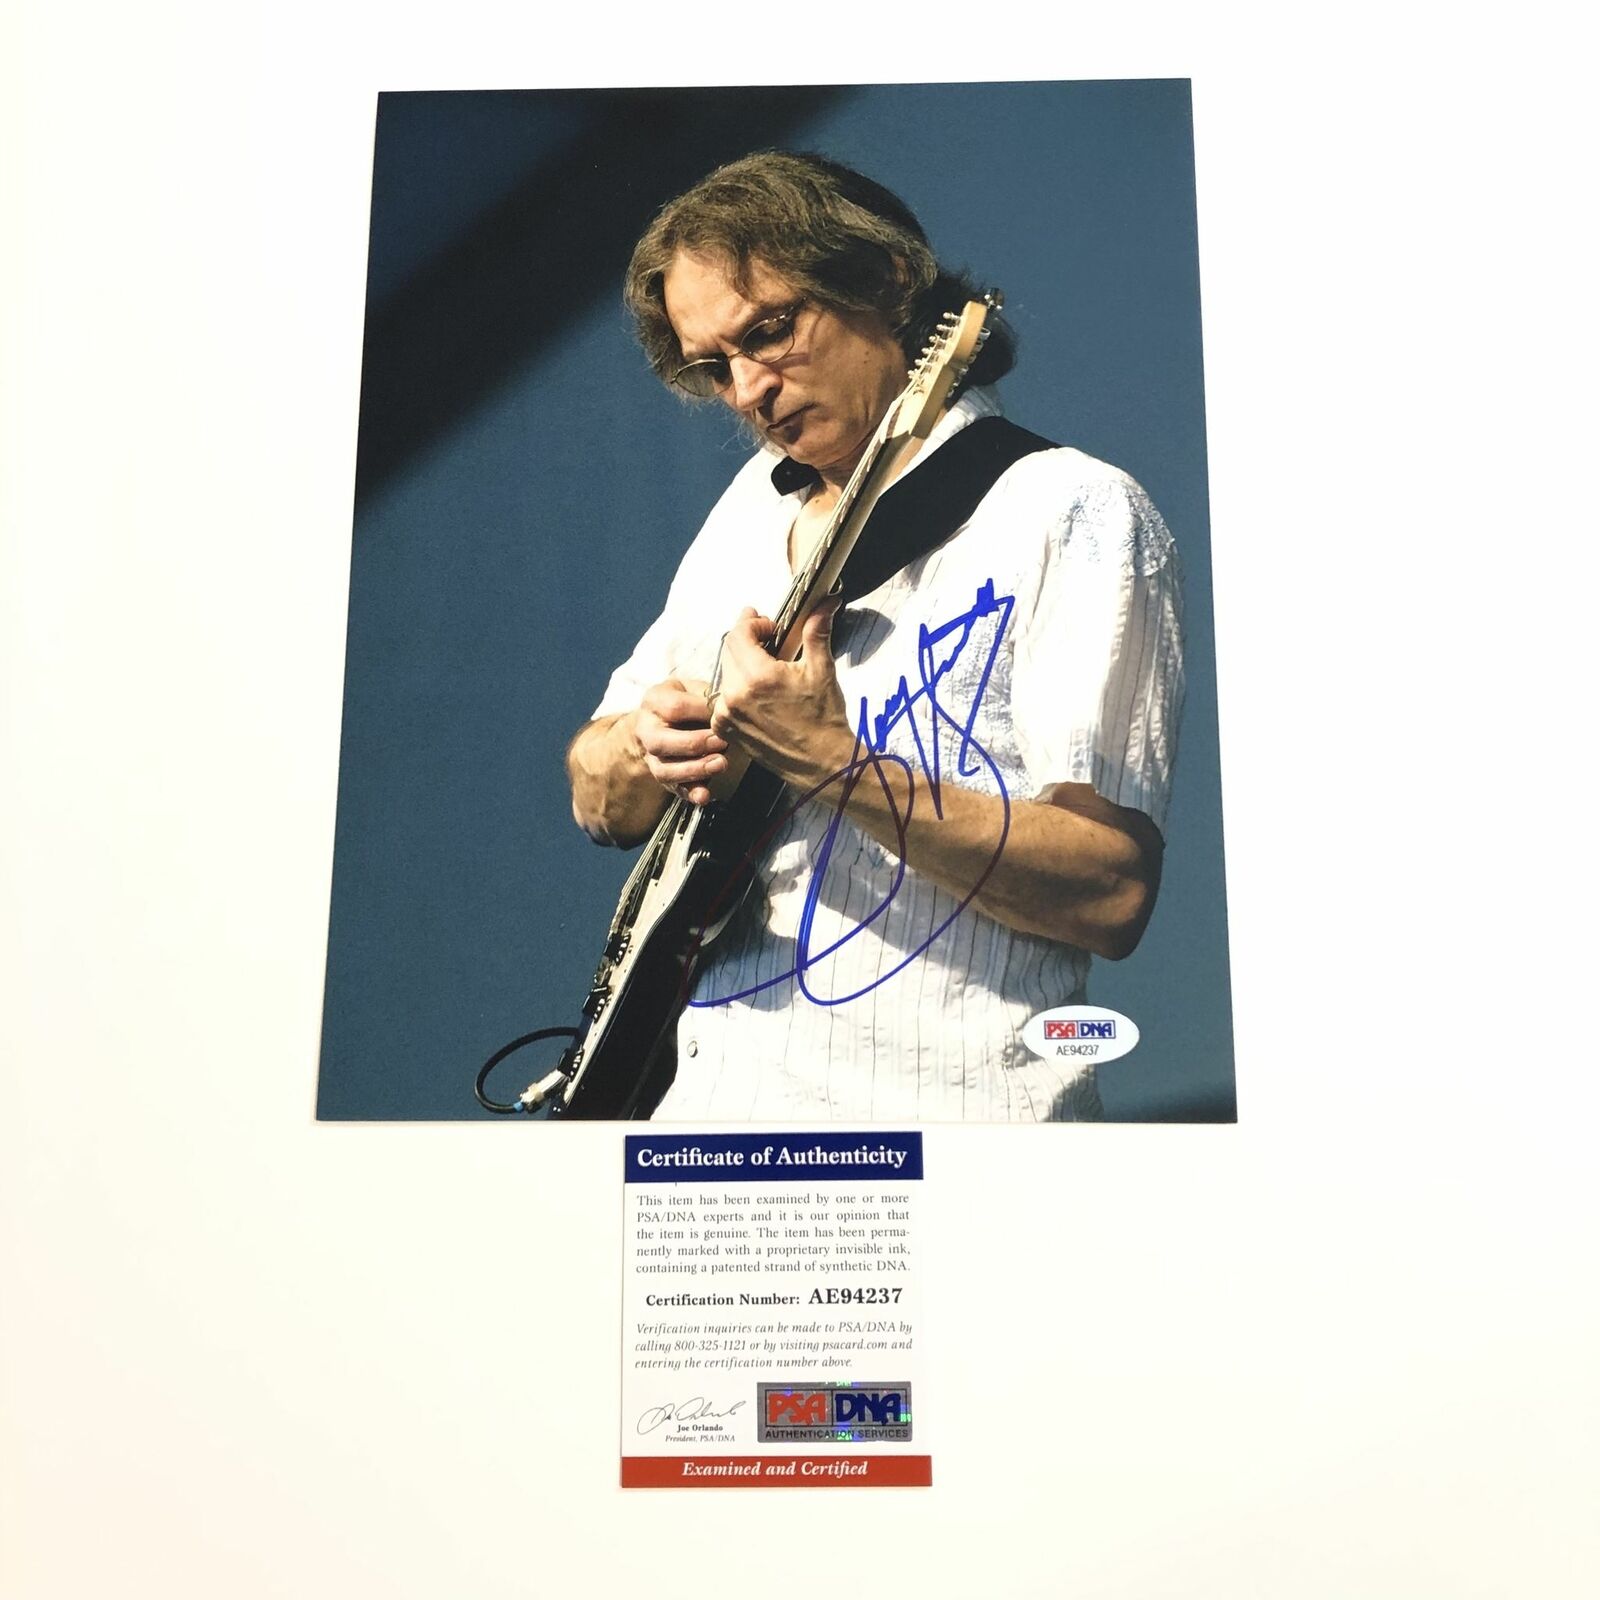 Sonny Landreth signed 8x10 Photo Poster painting PSA/DNA Autographed